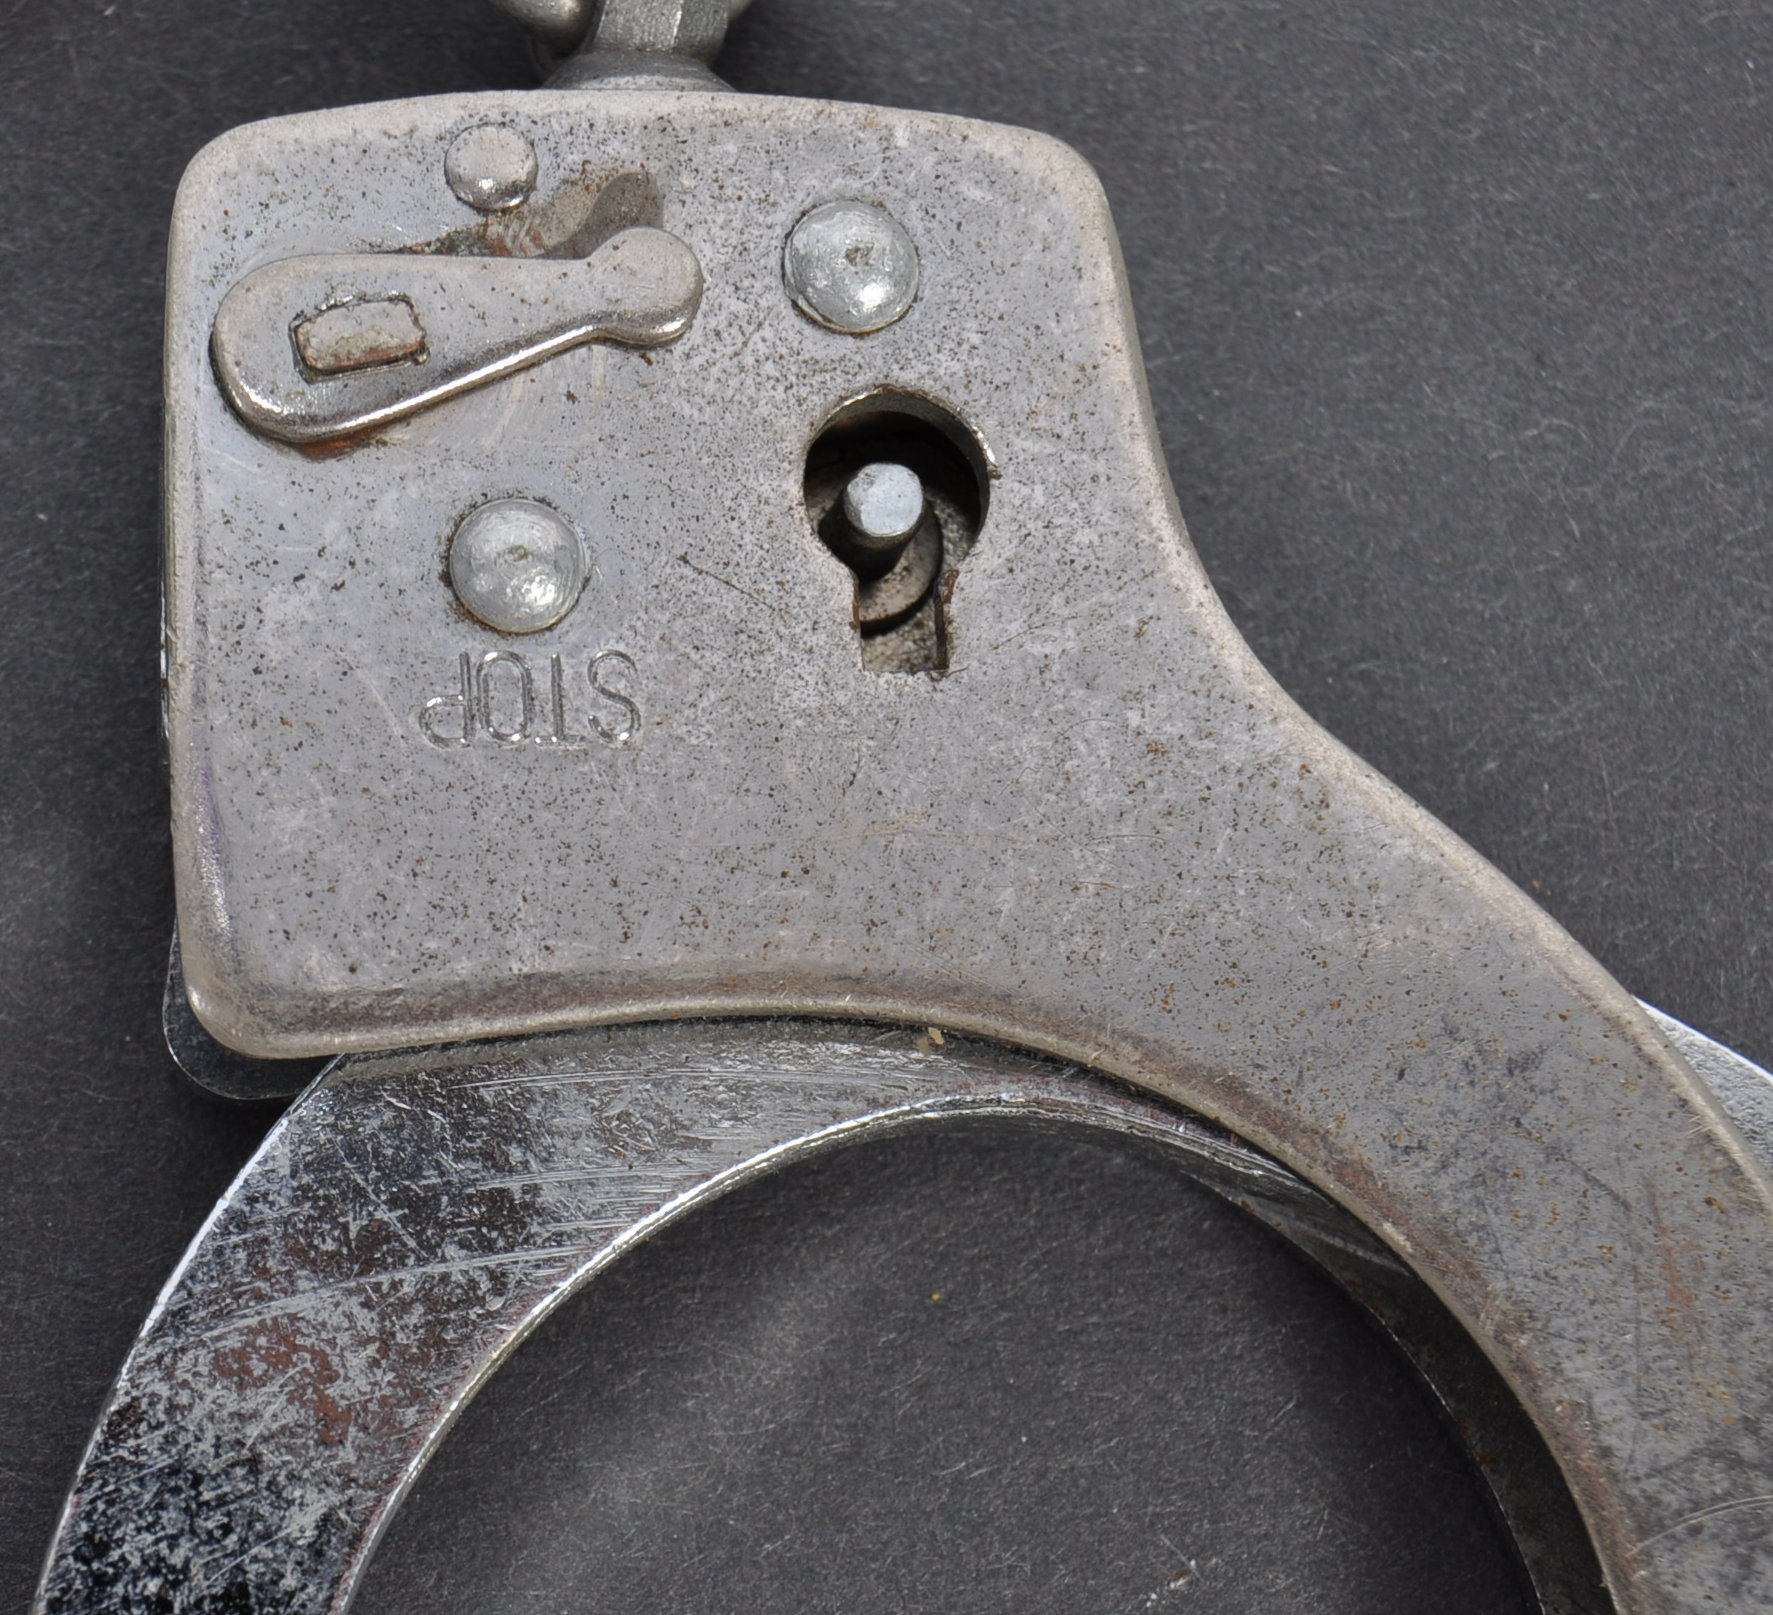 TWO PAIRS OF VINTAGE POLICE HANDCUFFS - Image 2 of 4